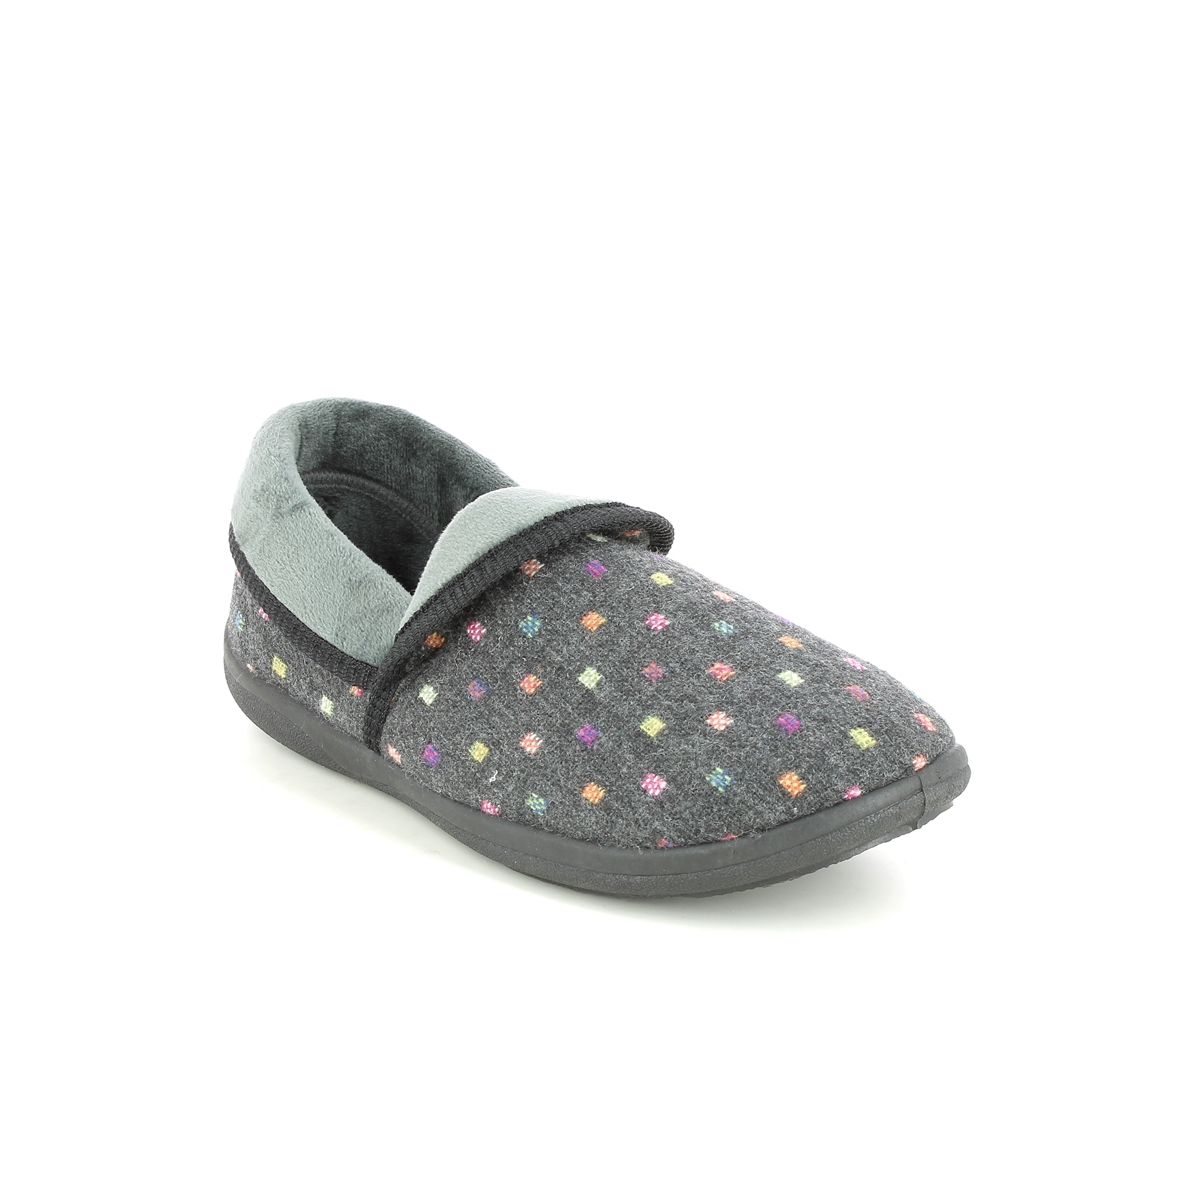 Padders Mellow Ee Fit Grey Womens slippers 460-1576 in a Plain Textile in Size 7